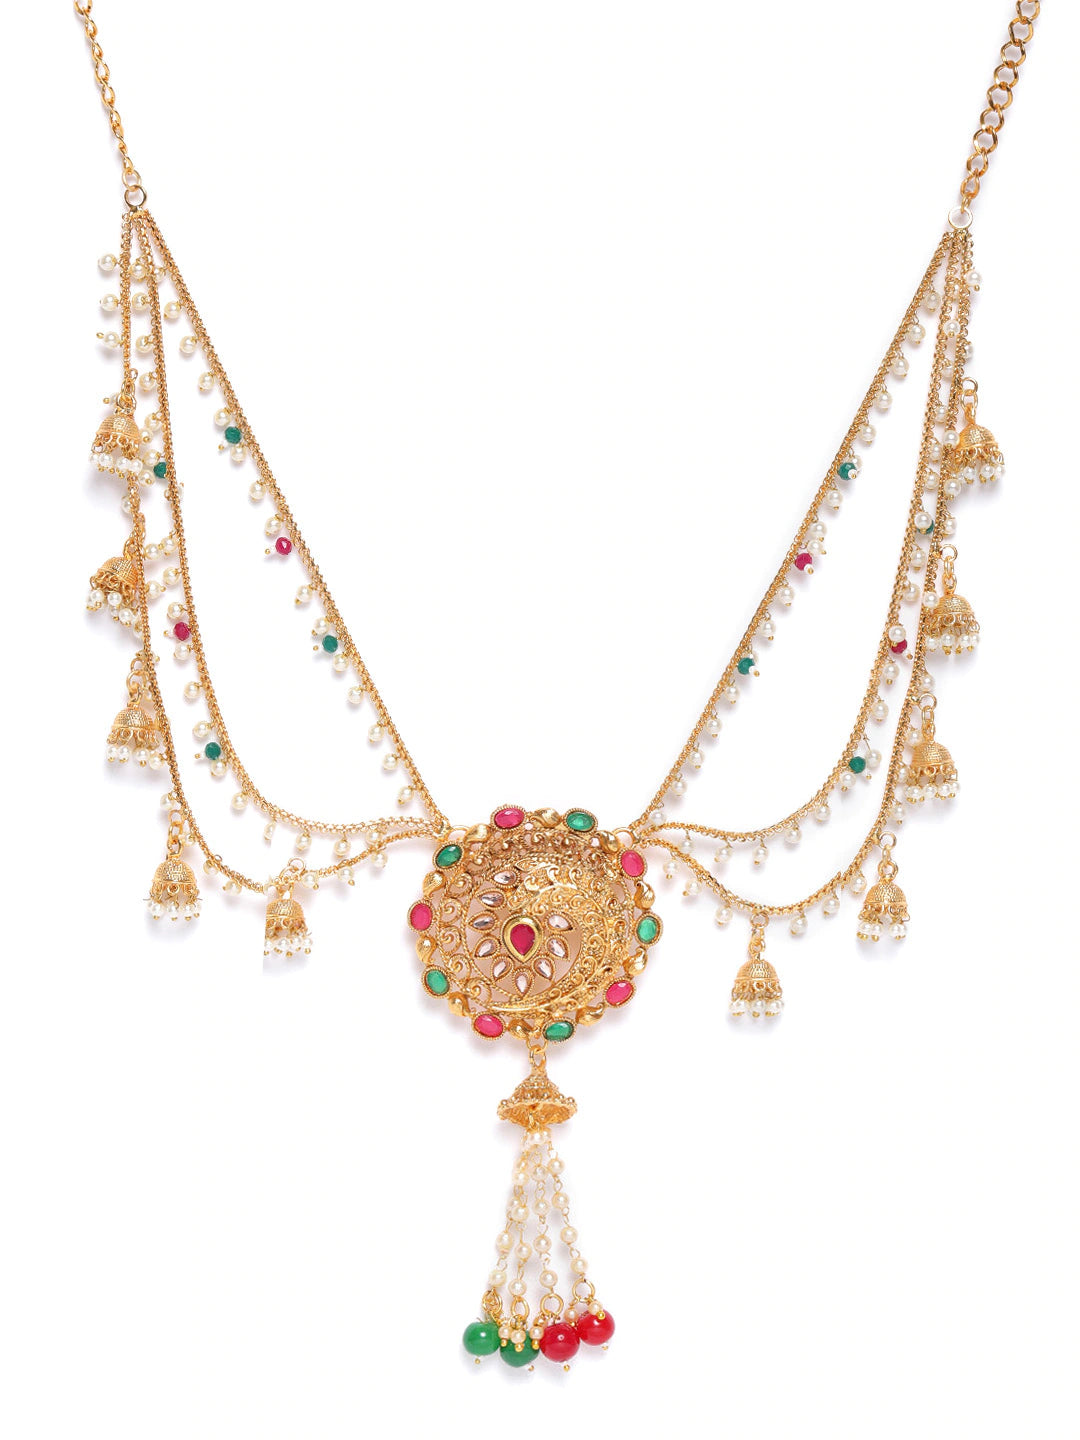 Off-White & Green Gold-Plated CZ Studded & Beaded Handcrafted Kamarbandh ( American Diamond , Gold , Off White )